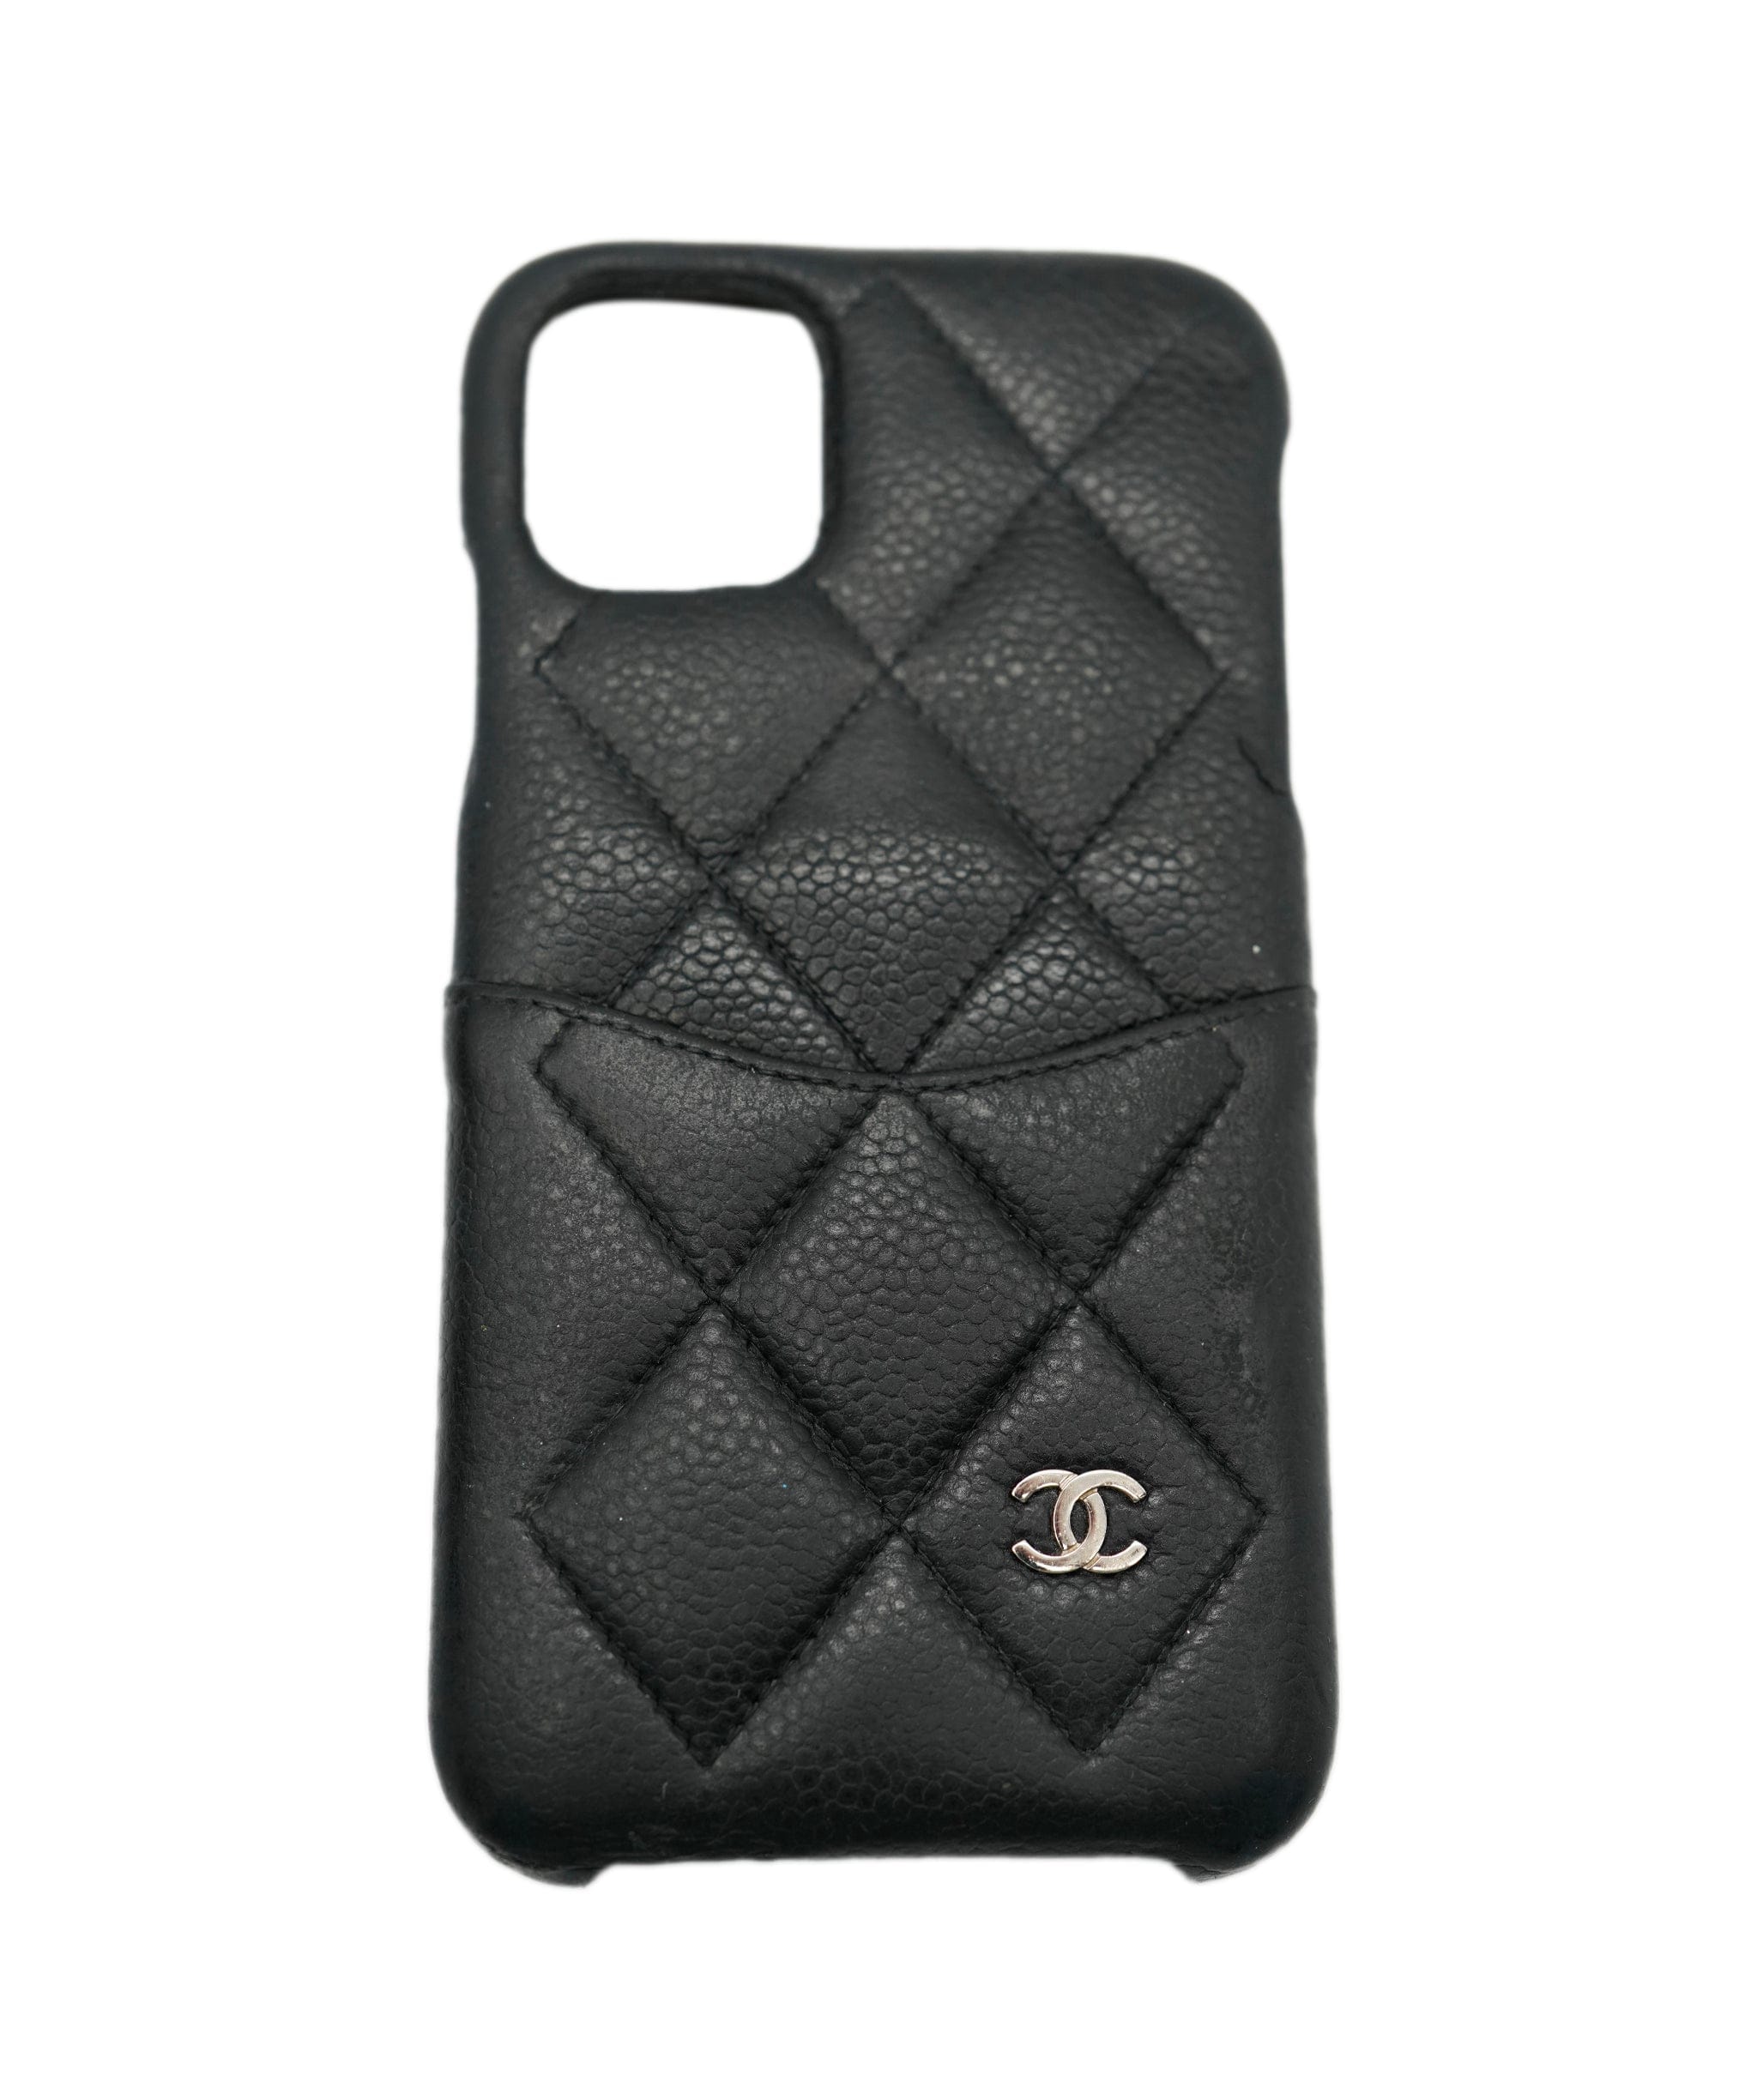 Chanel Iphone X chanel case ALC0518